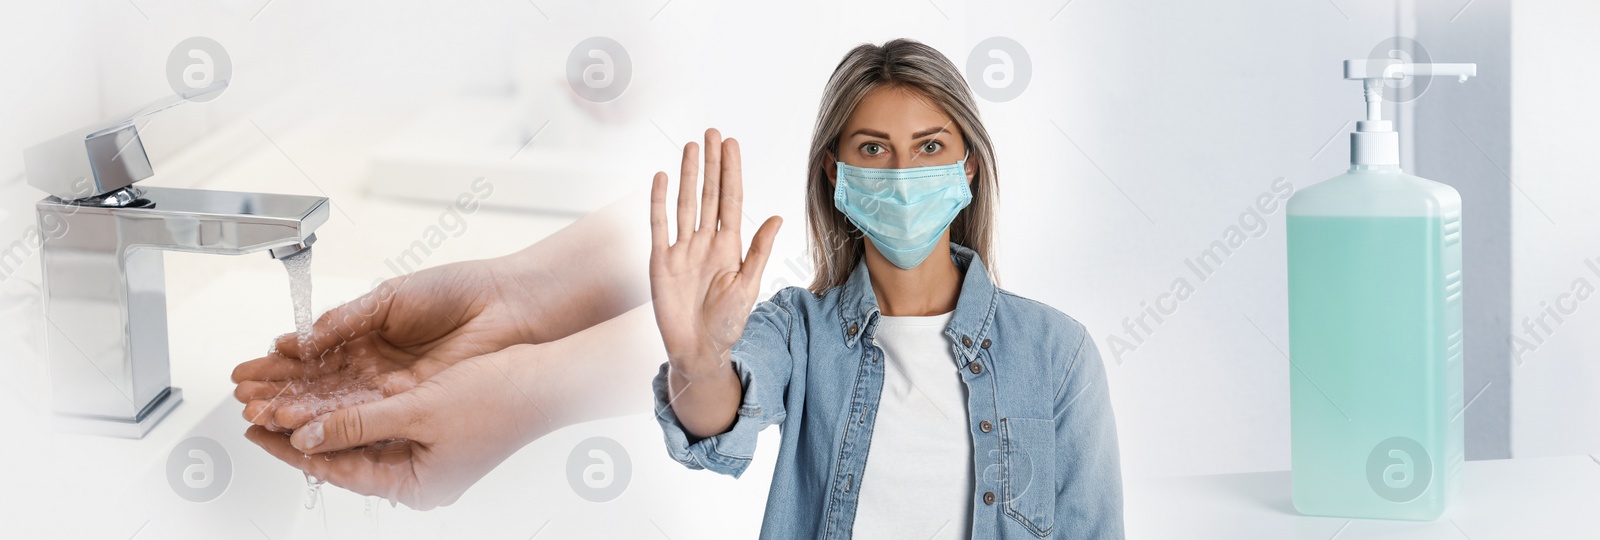 Image of Stop coronavirus spreading. Using sanitizer, wearing mask and washing hands - preventing contamination, banner design